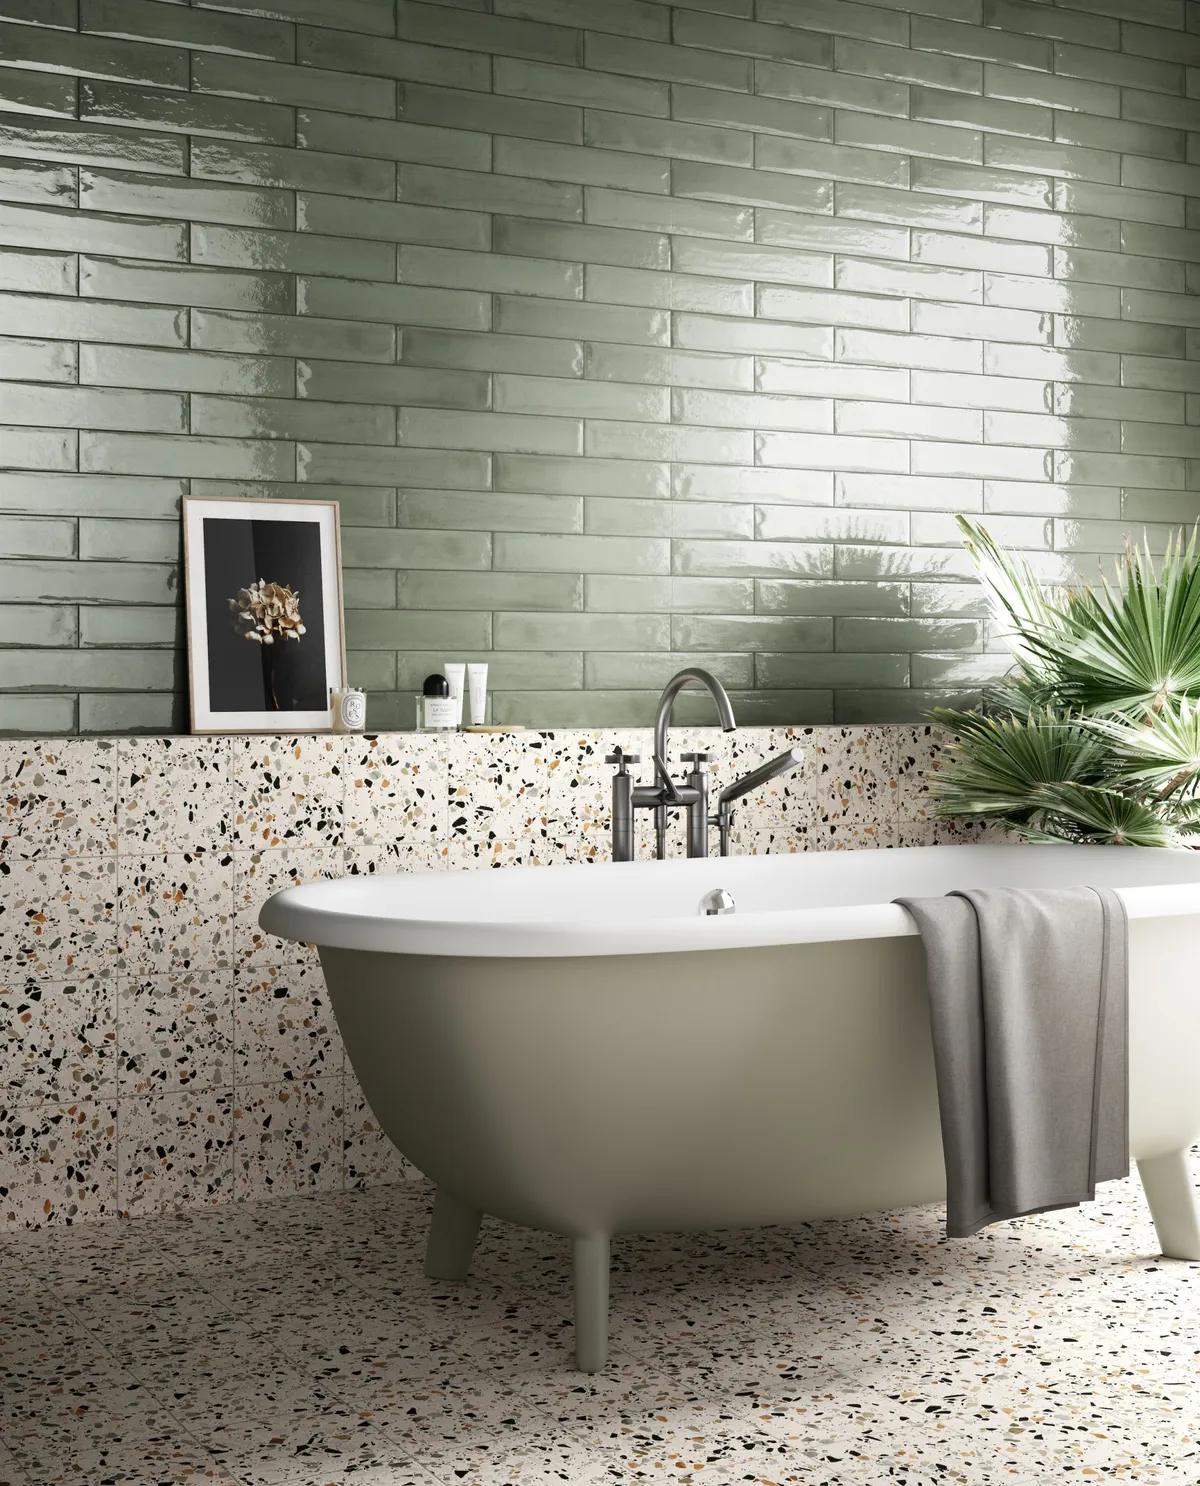 Arlo Light terrazzo tile from Porcelain superstore